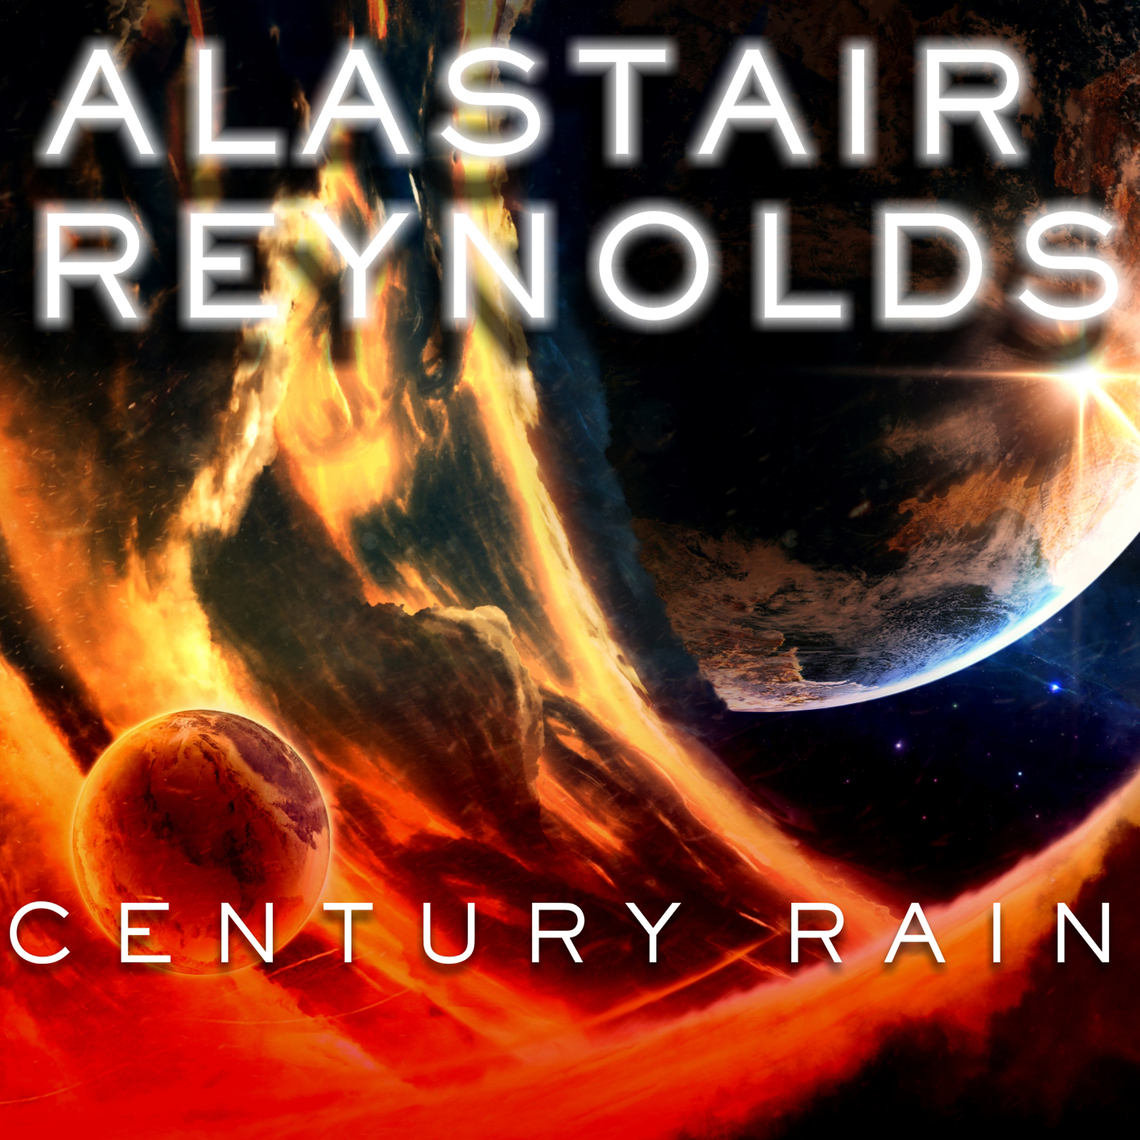 Review: The Medusa Chronicles, by Stephen Baxter & Alastair